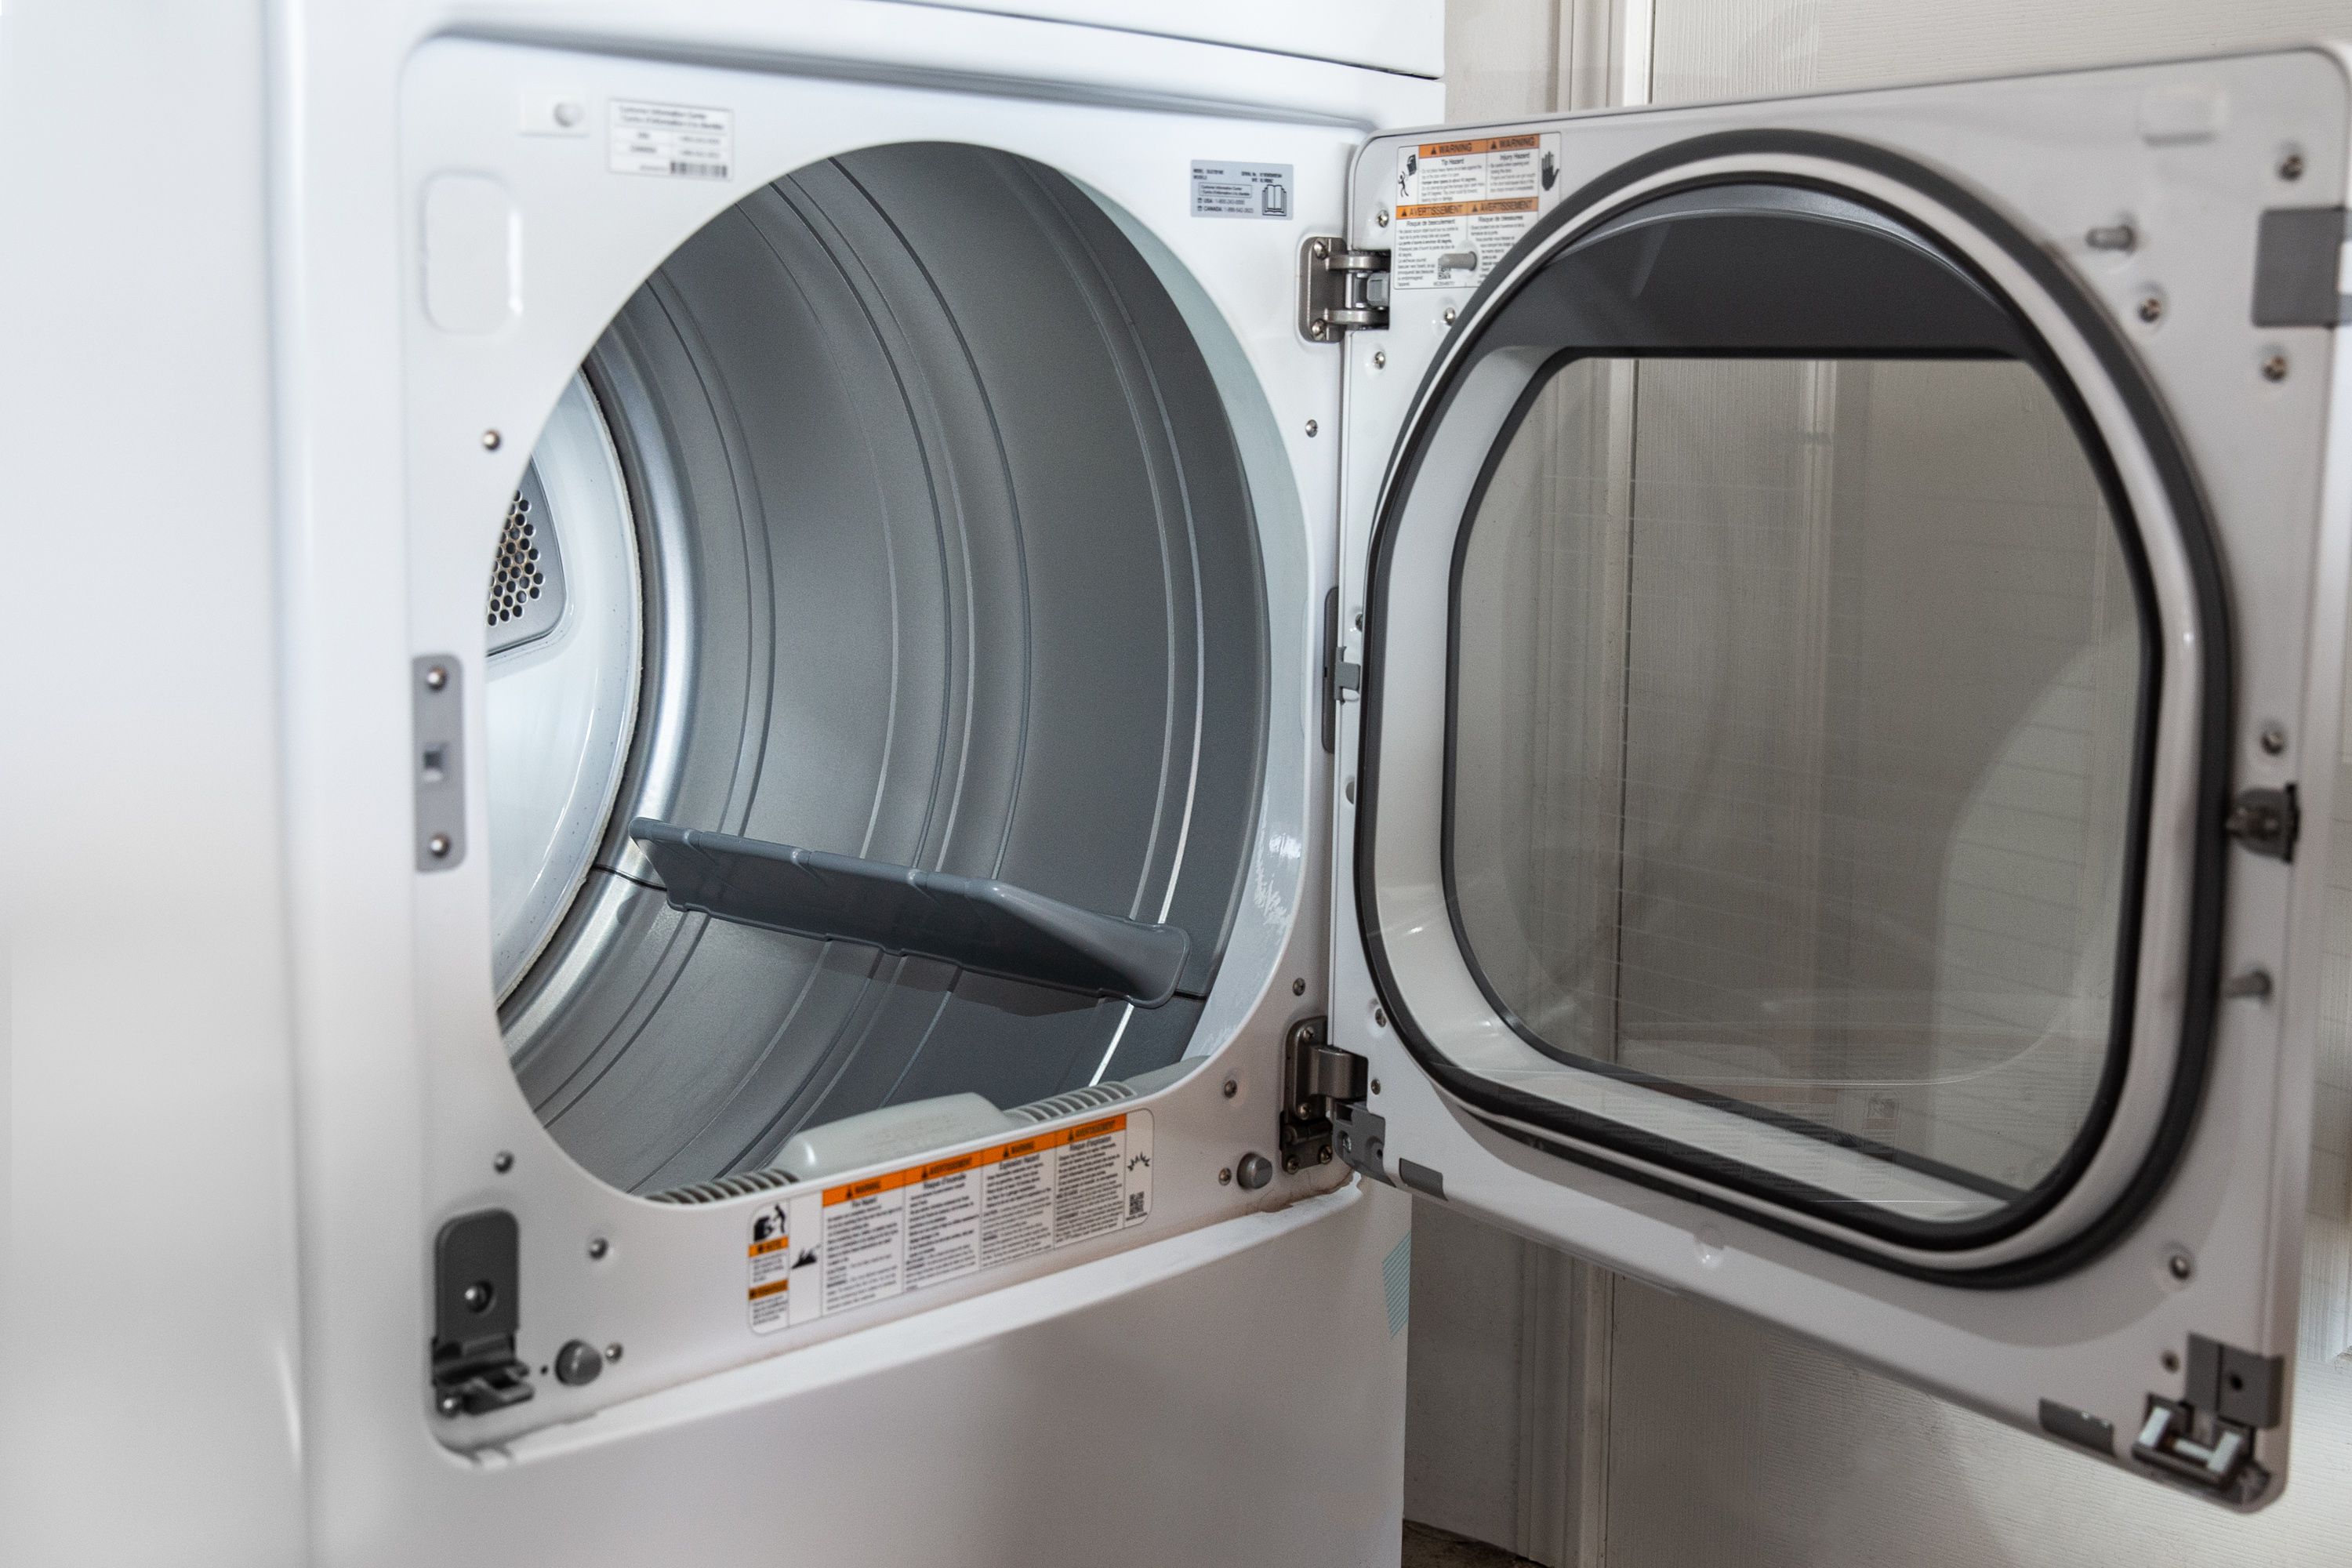 7 Clothes Dryer Problems and How to Fix Them